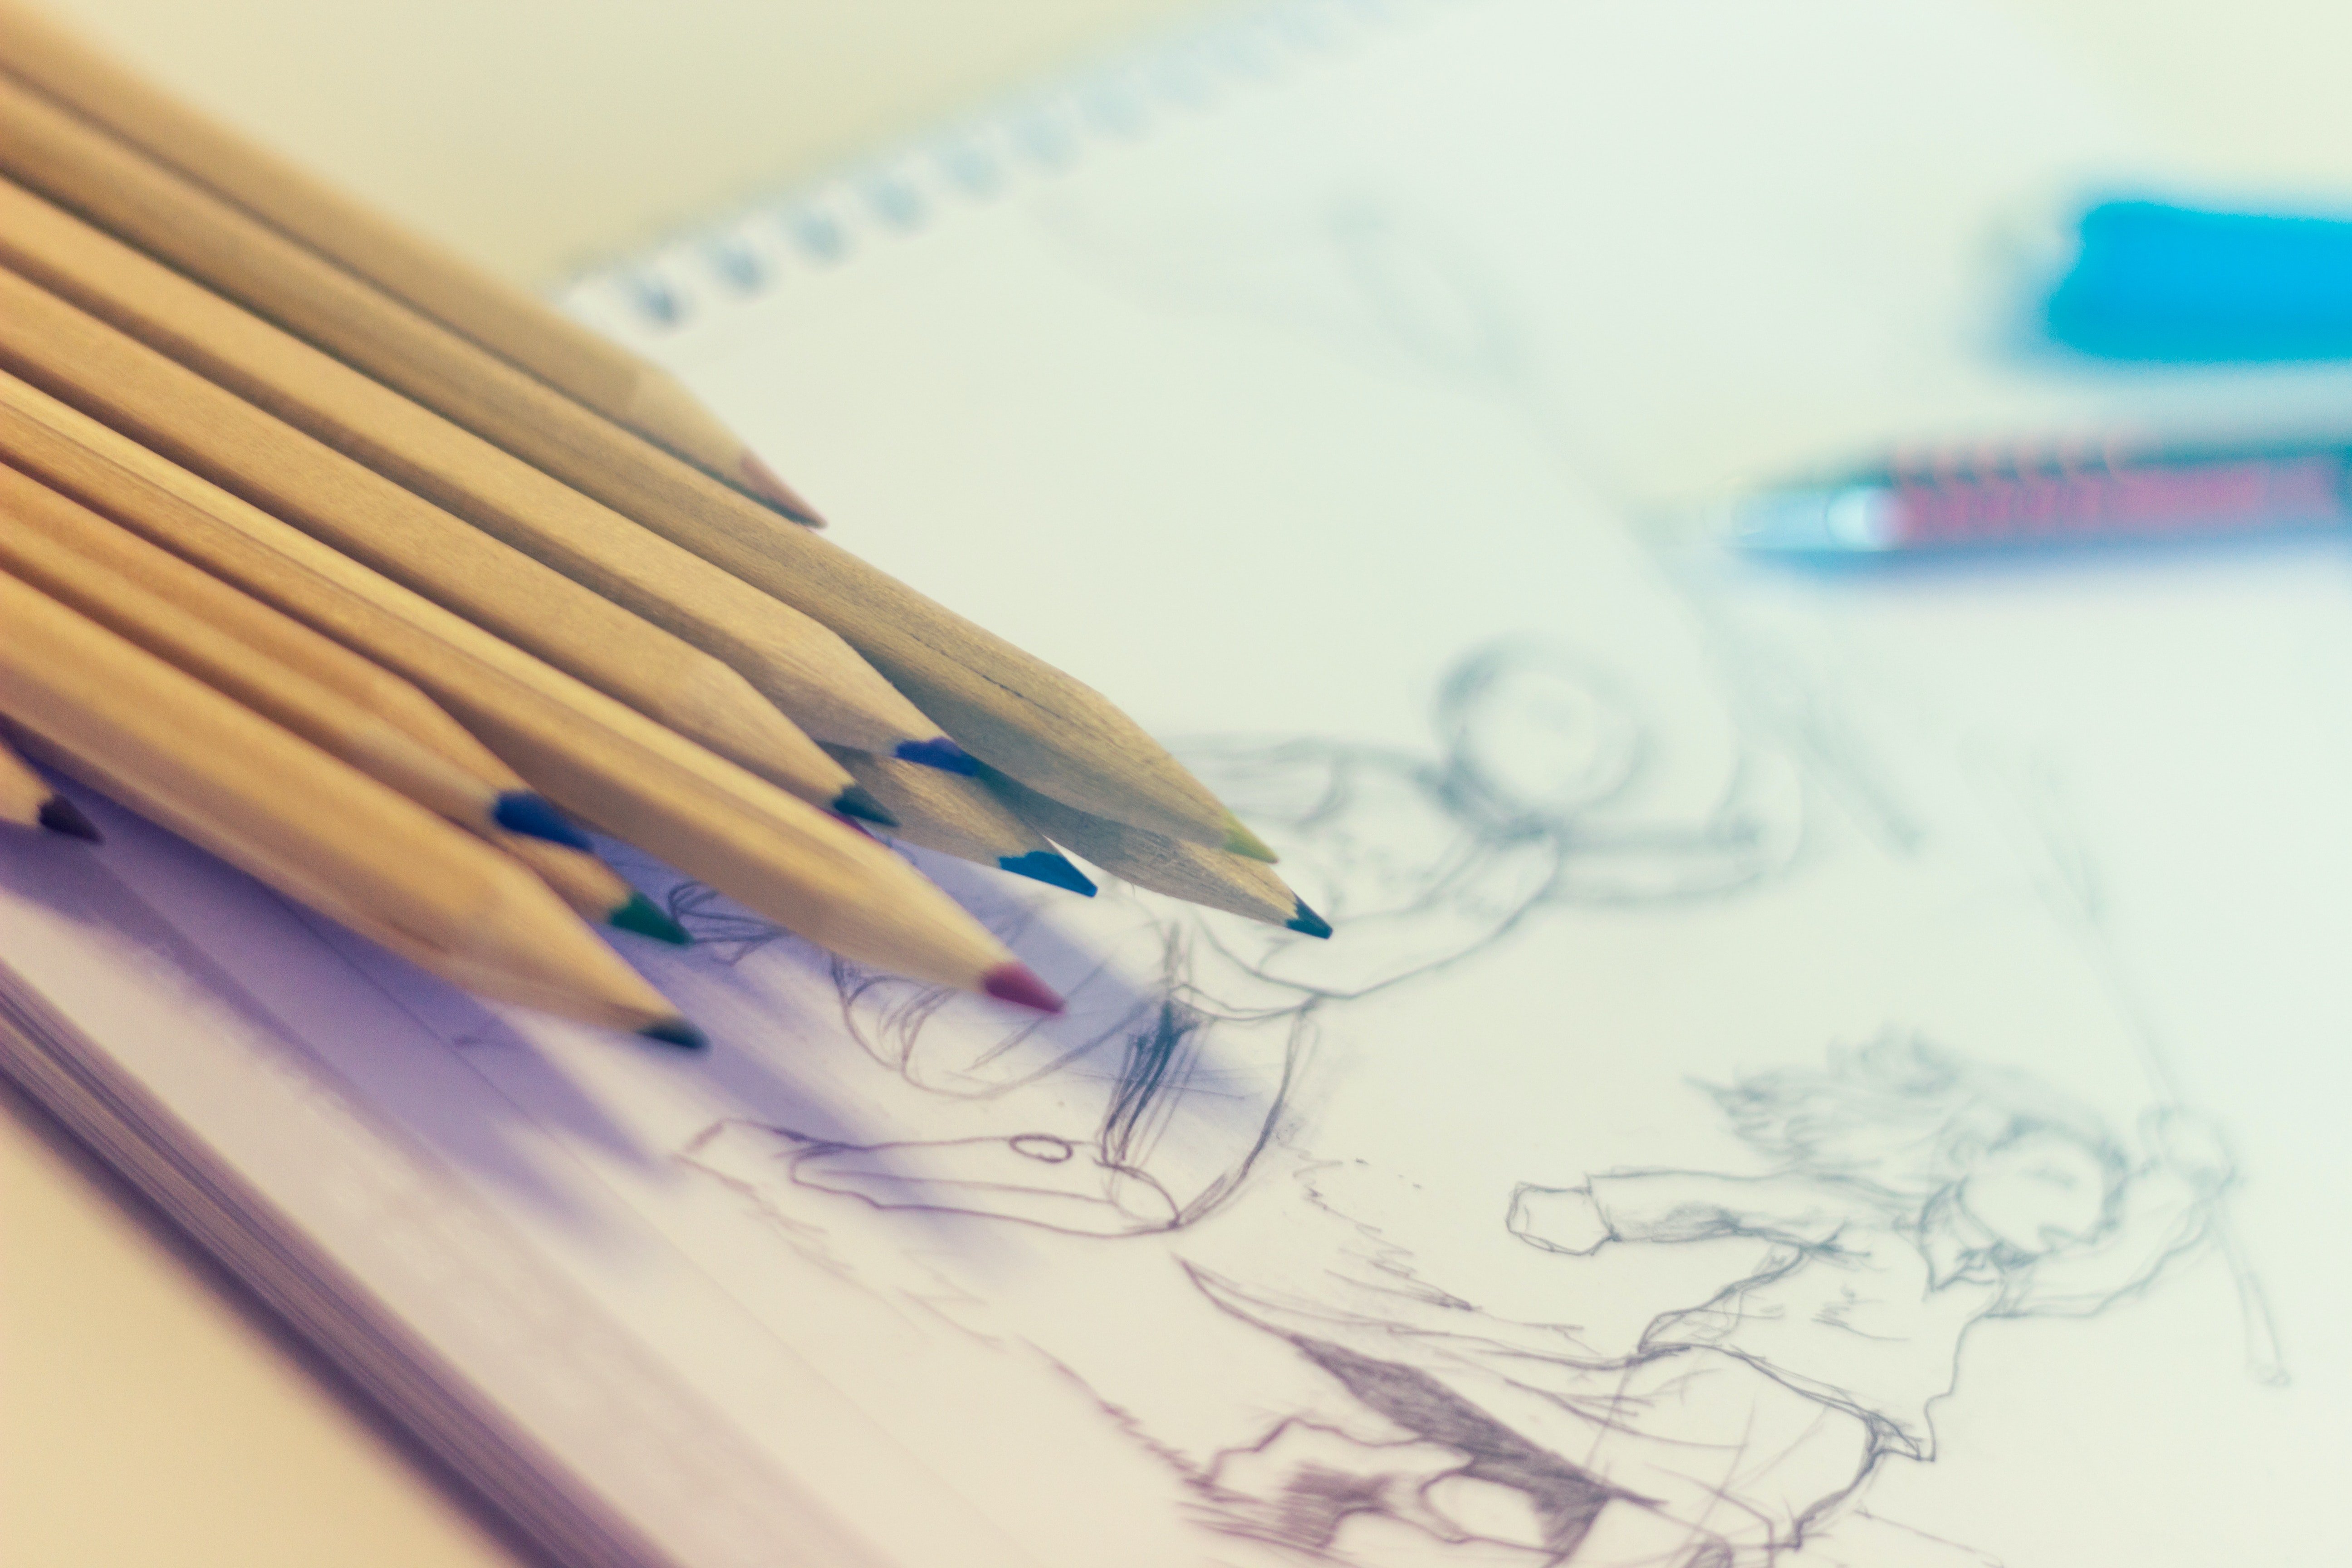 Diane would draw while her kids were sleeping so she had something to sell the following day. | Source: Pexels